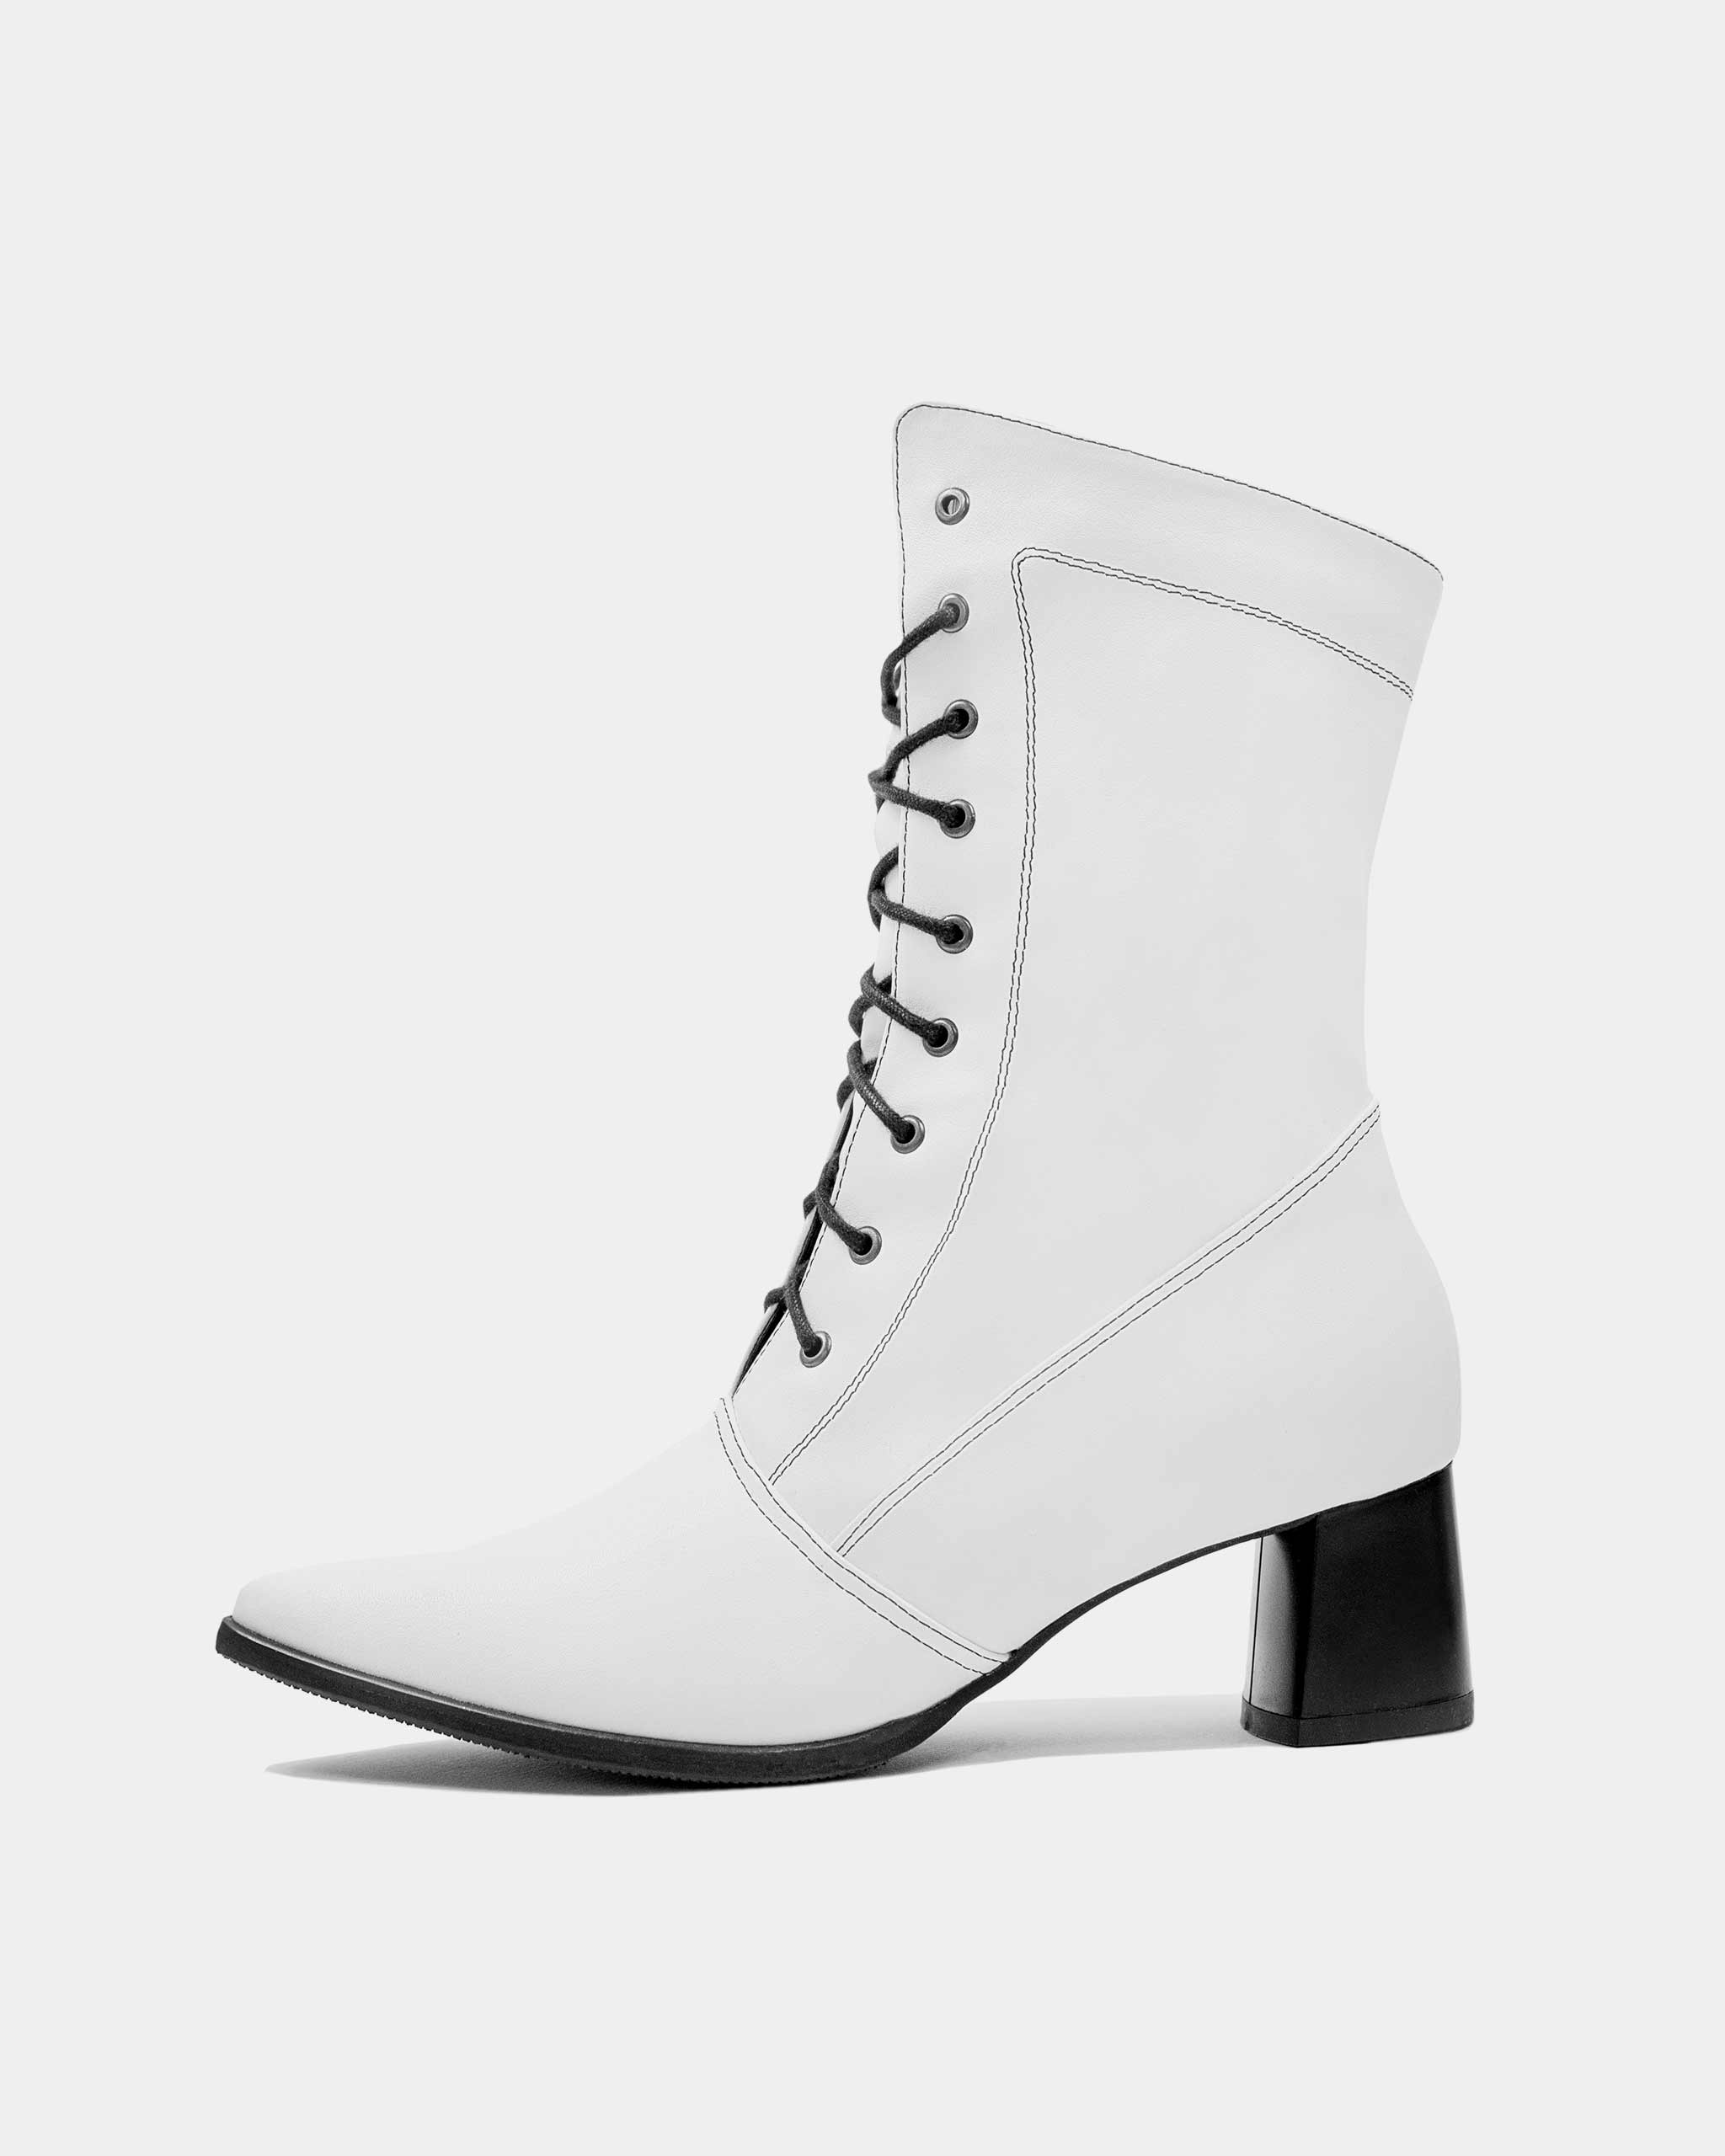 High Boots White Cactus Leather Boots | Ethical & Vegan Shoes